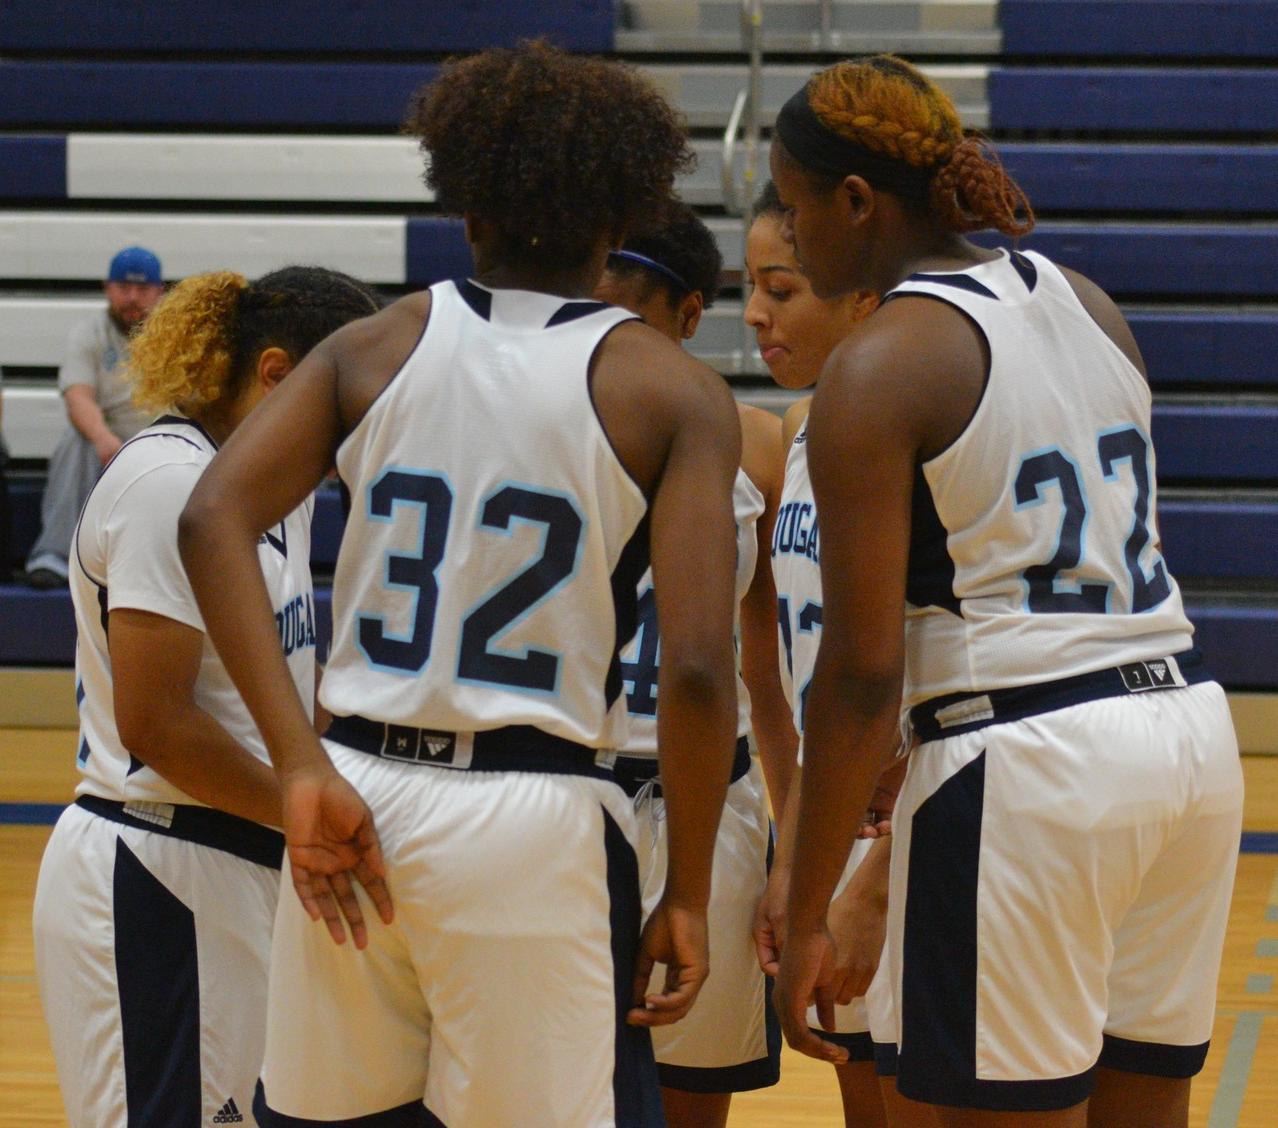 Women's Basketball Finds Life Hard on the Road